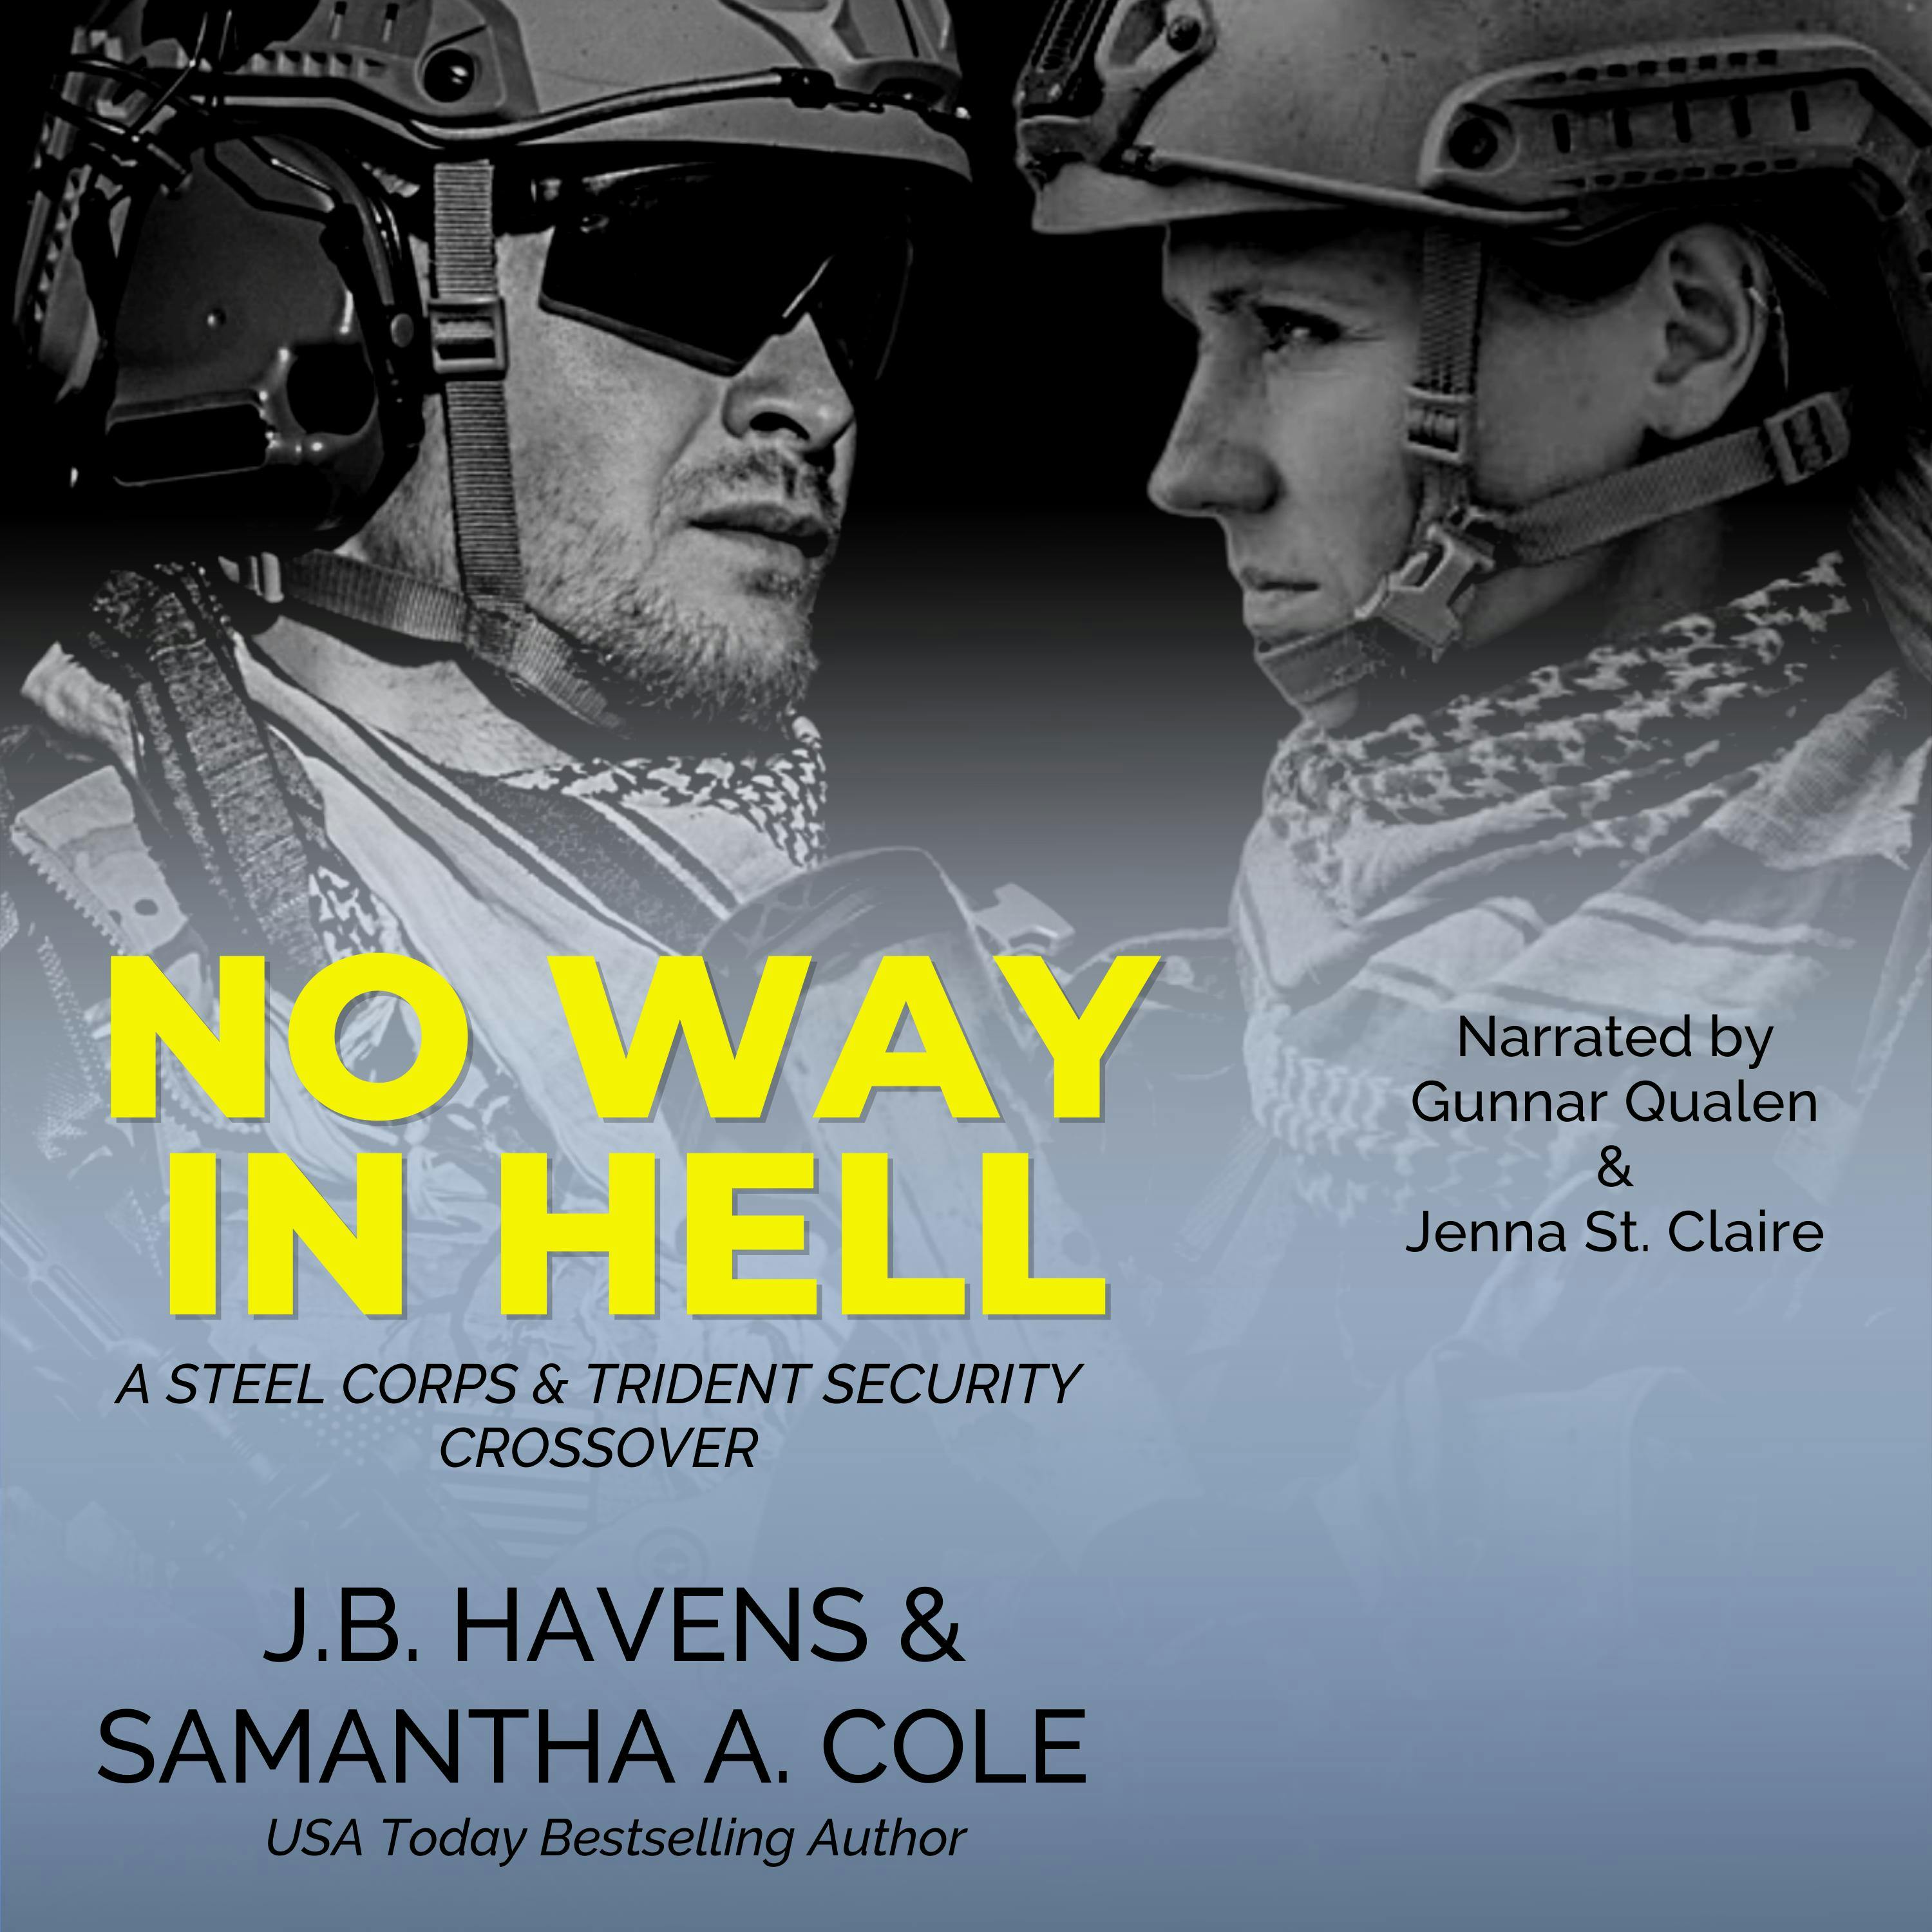 No Way In Hell: A Steel Corps & Trident Security Crossover - Samantha A. Cole, J.B. Havens